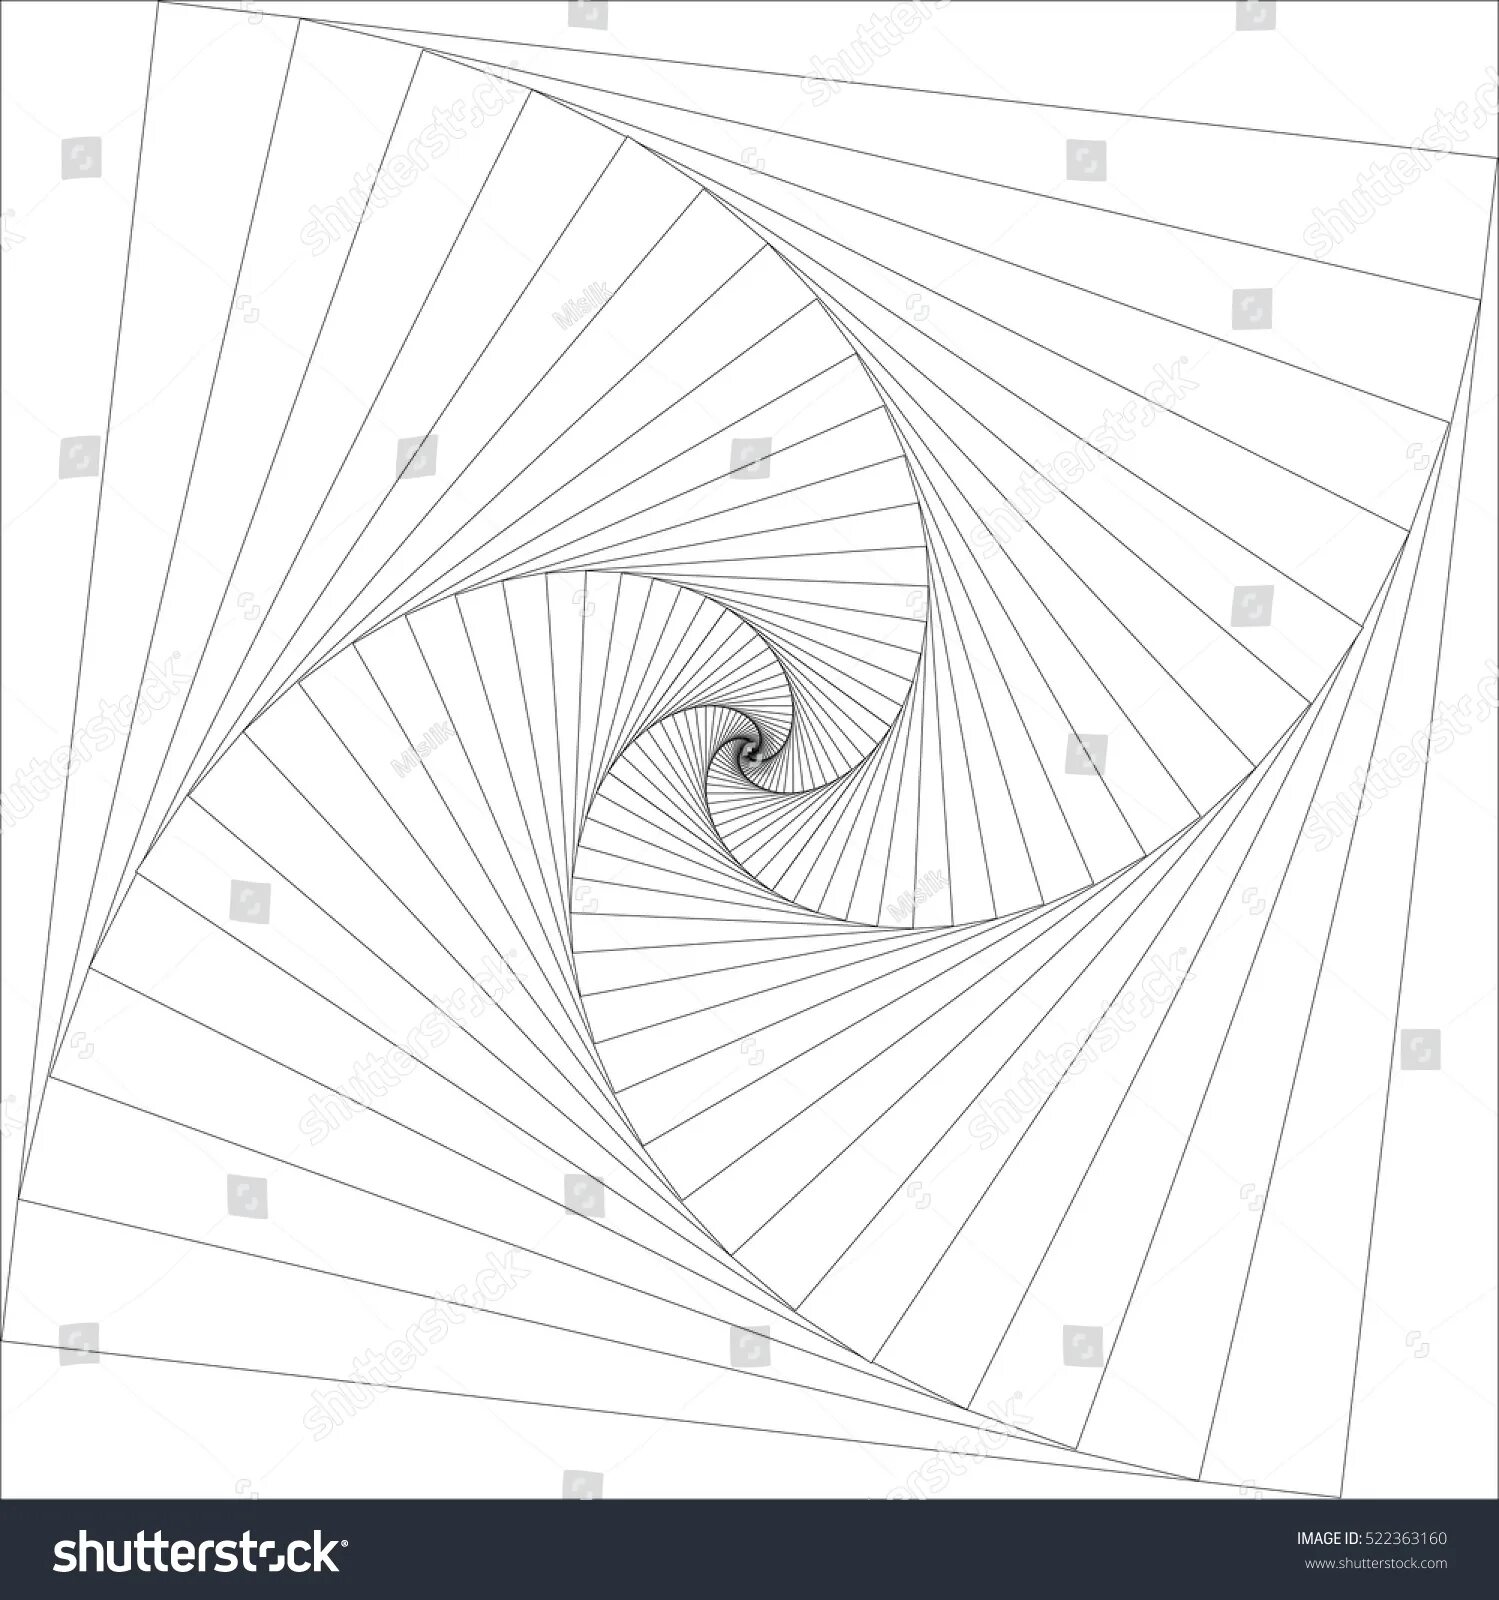 Attractive program spiral coloring page